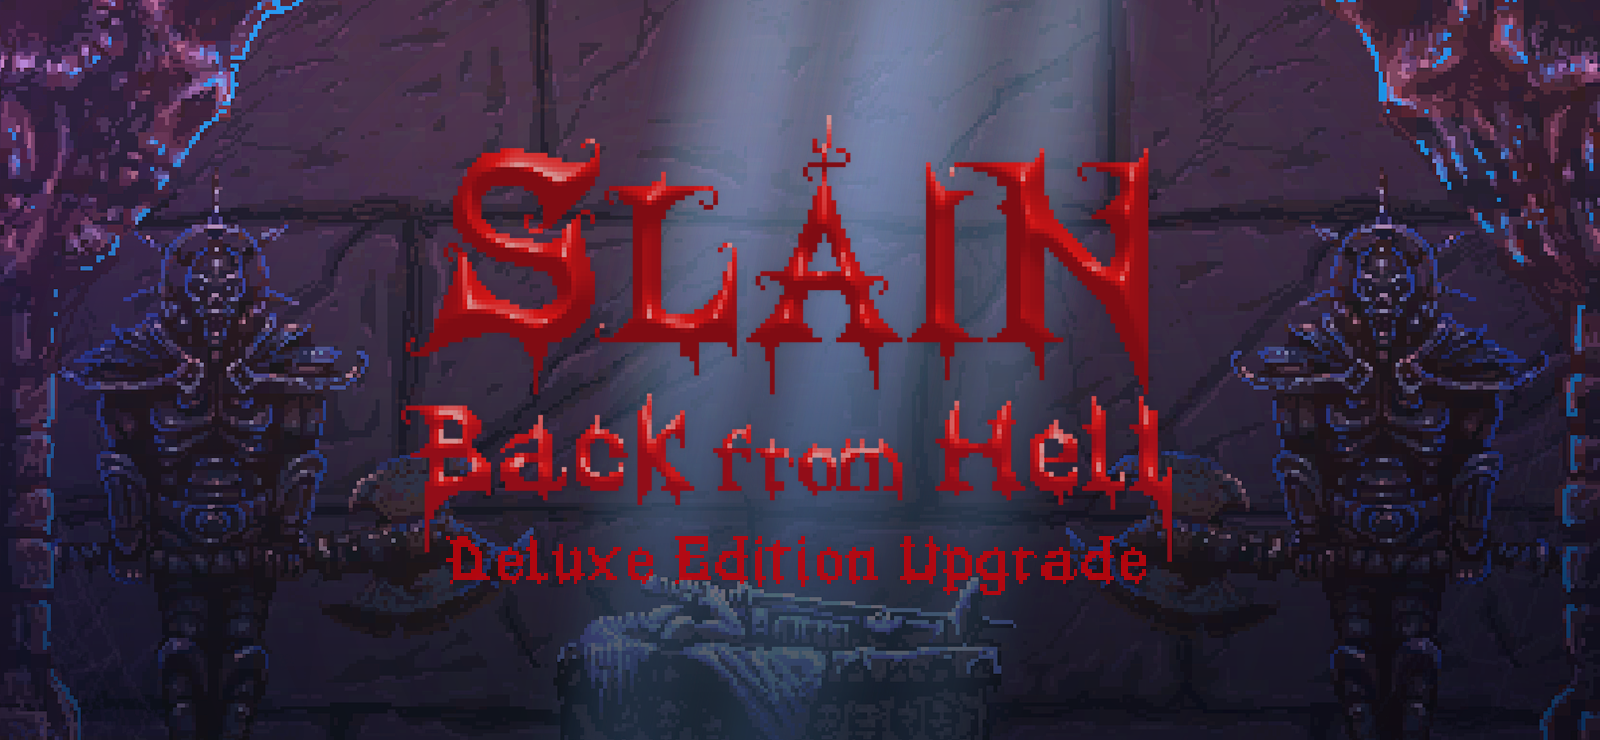 Slain: Back From Hell Deluxe Edition Upgrade